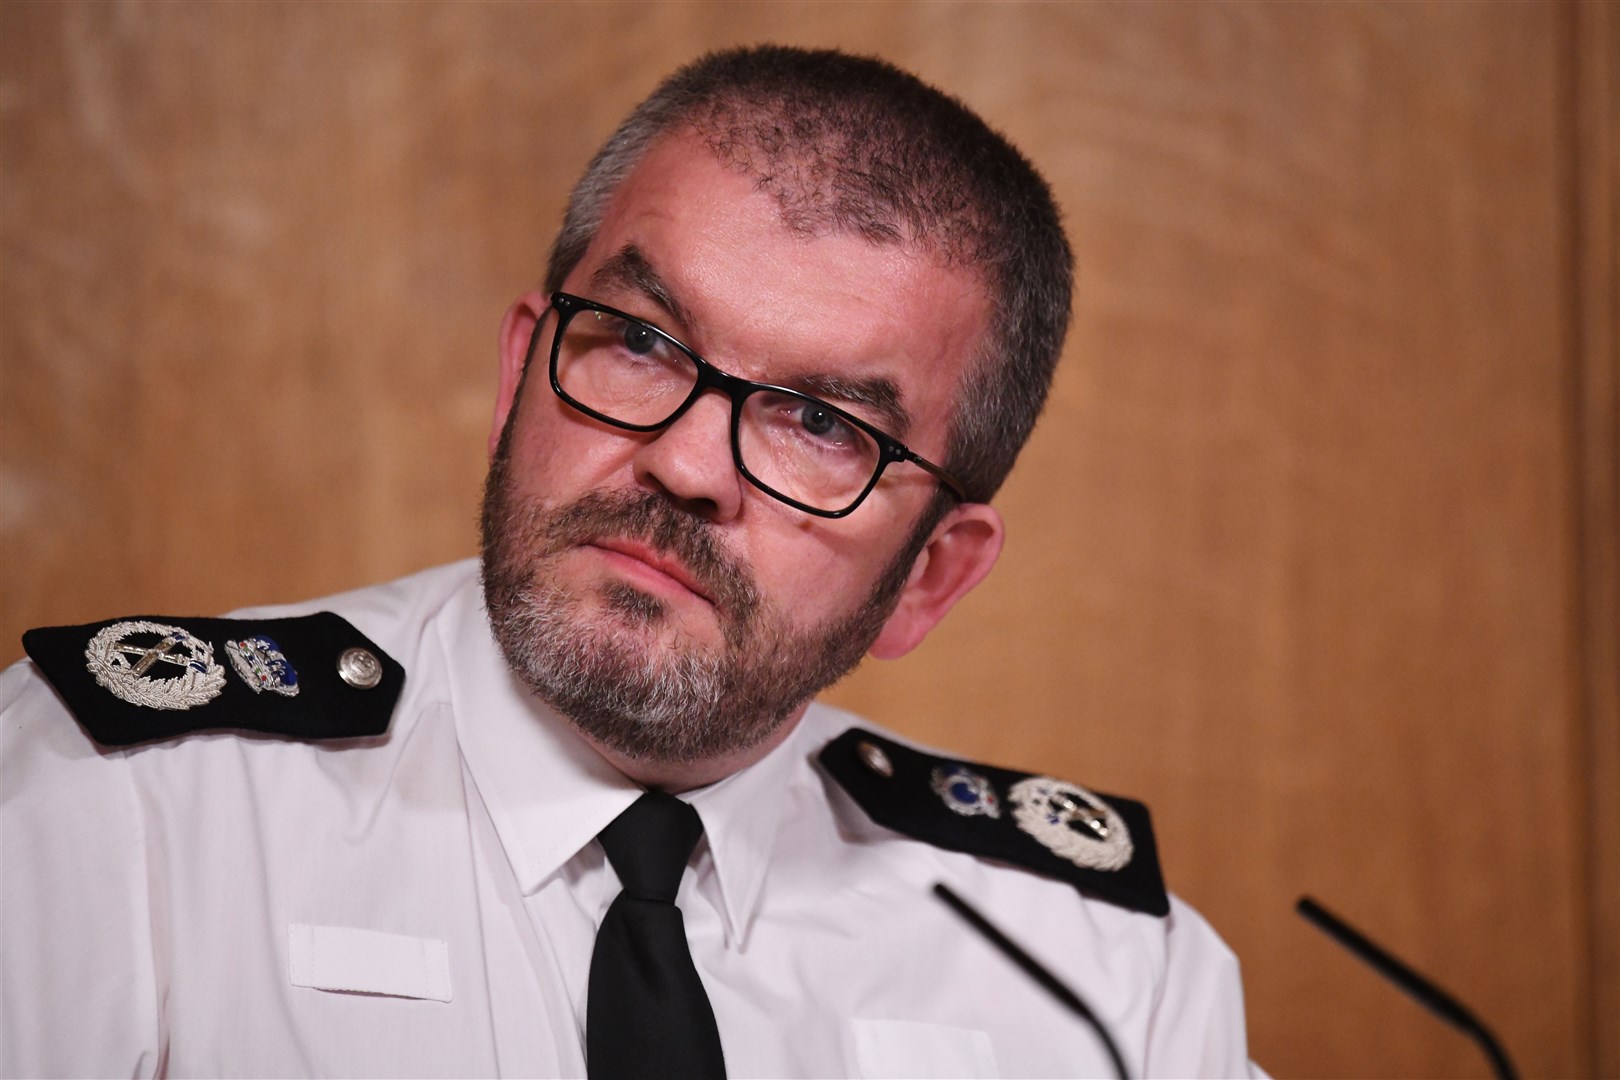 Martin Hewitt, chair of the National Police Chiefs’ Council, has told all chief constables to act immediately (PA)